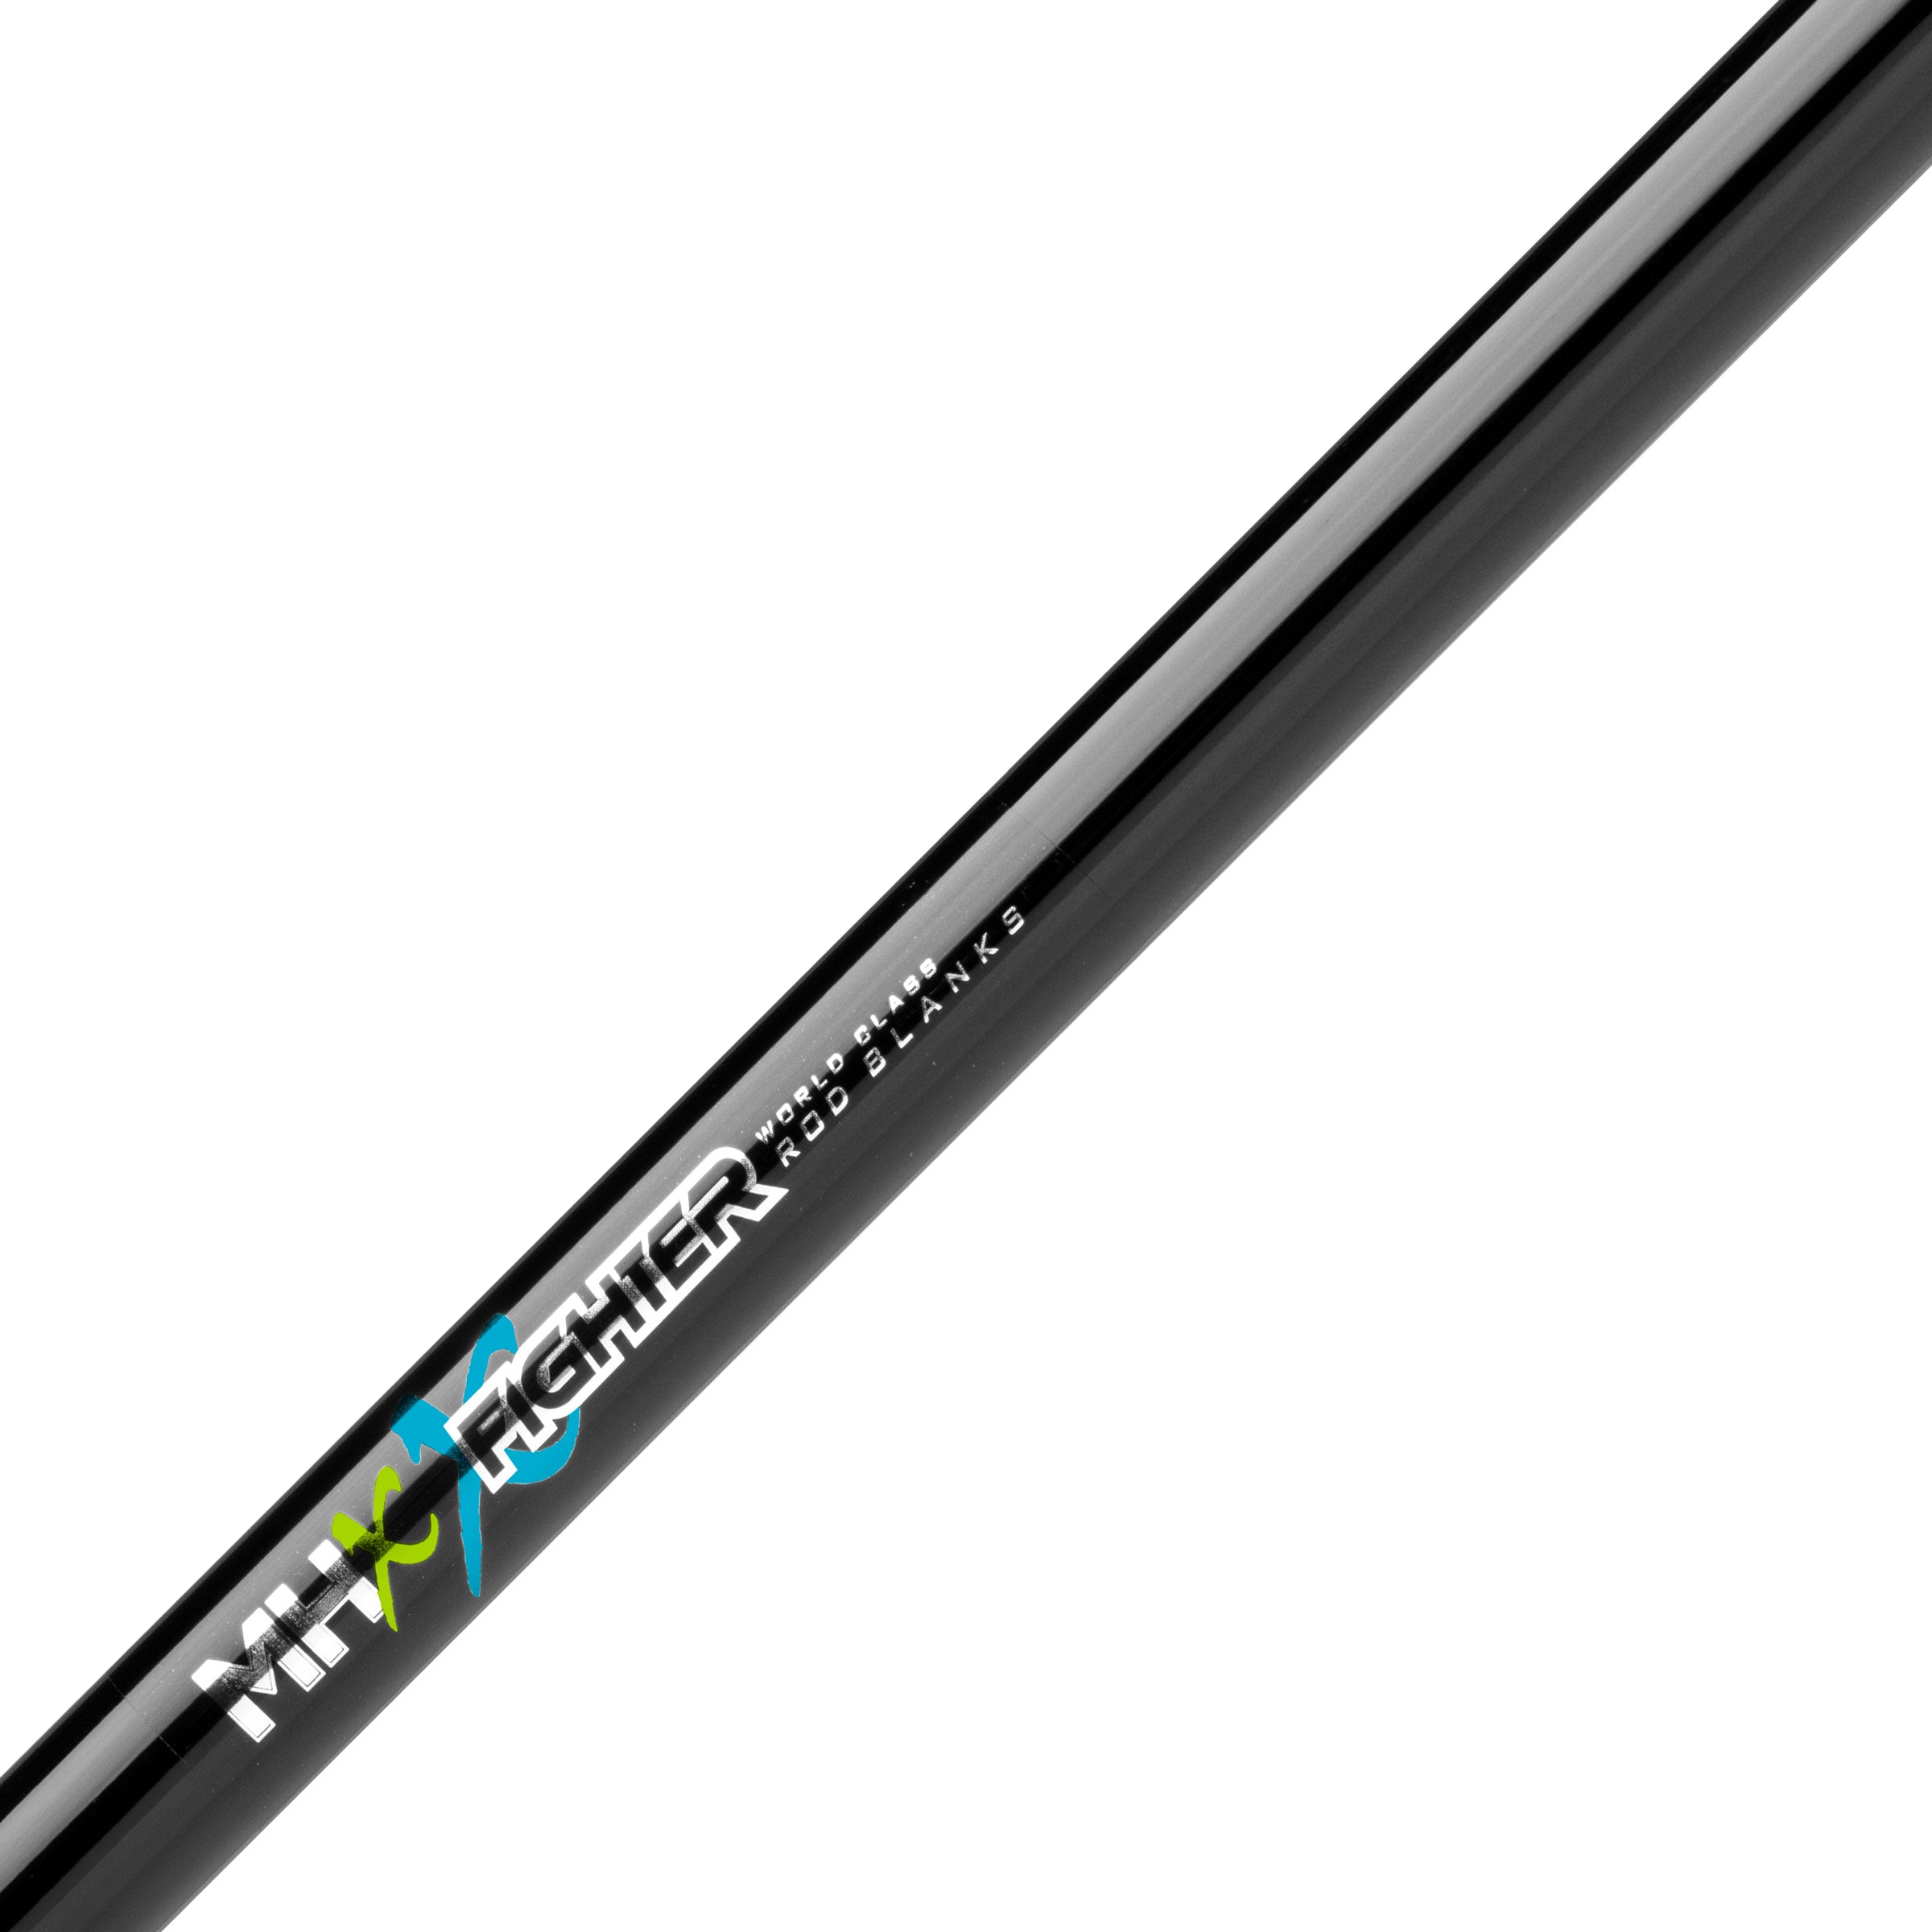 MHX 7'0" Light X-Fighter Offshore Graphite Composite Rod Blank XF700L